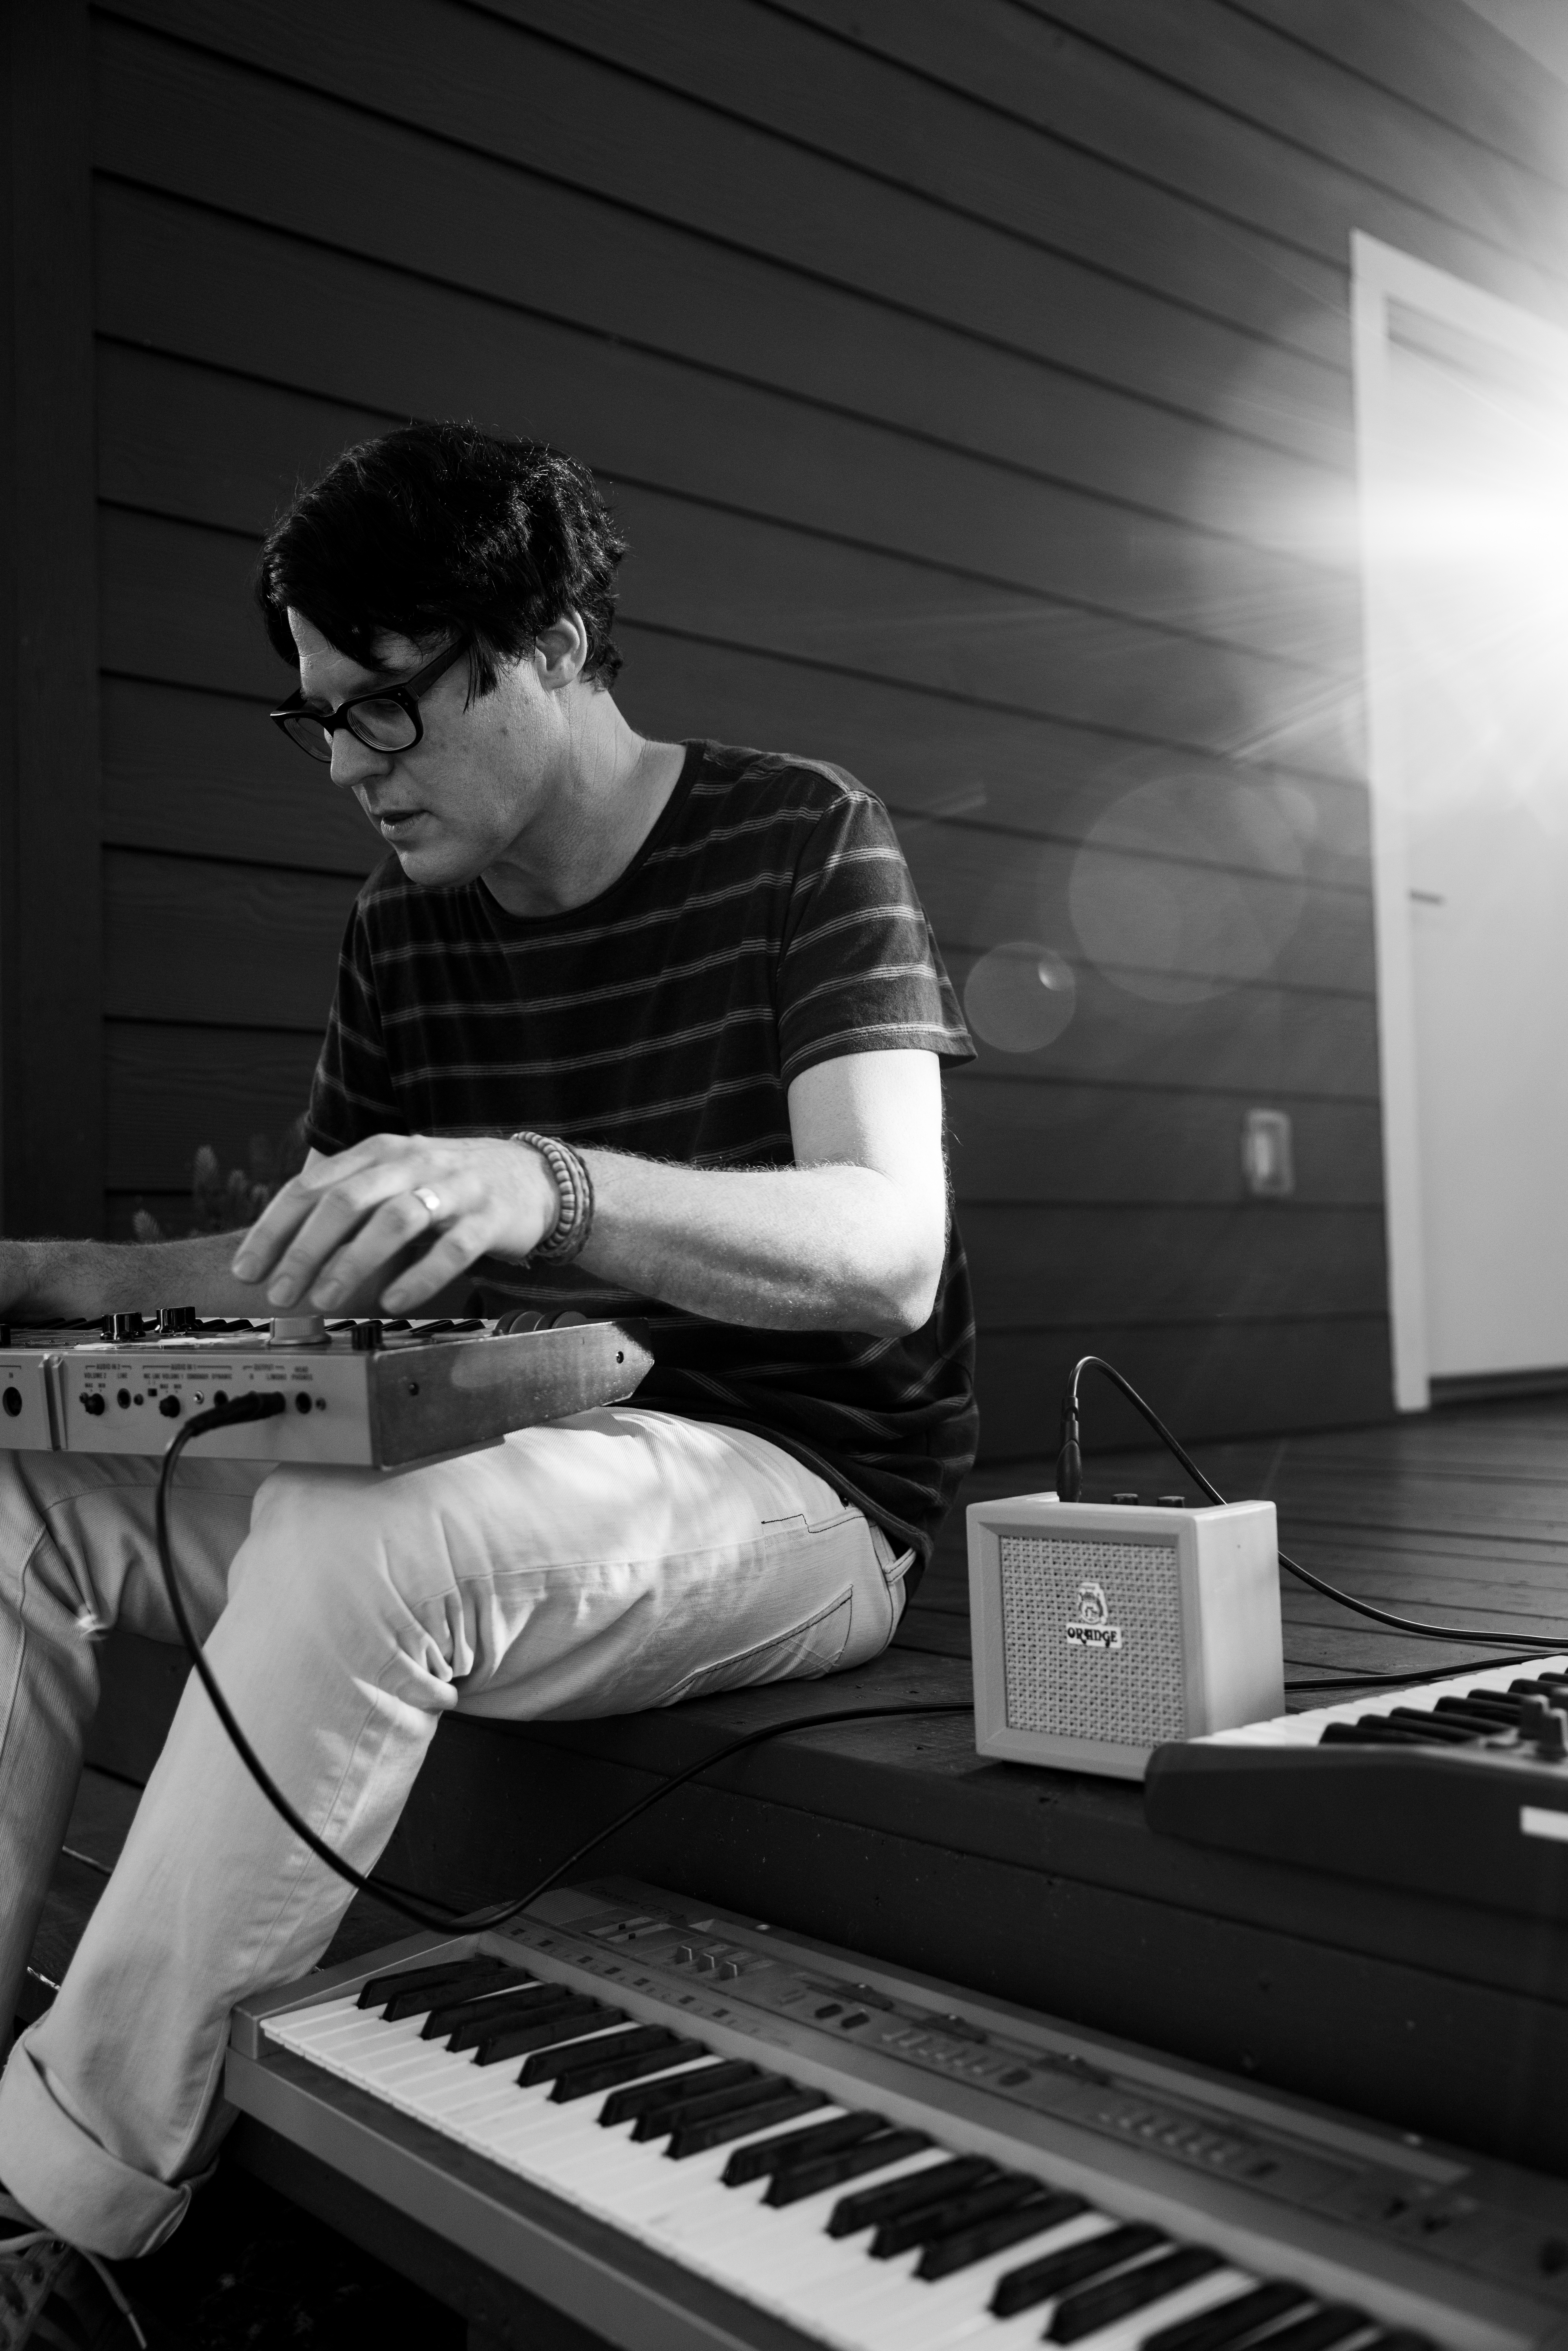 Playing with instruments, John Dufilho sits on a step